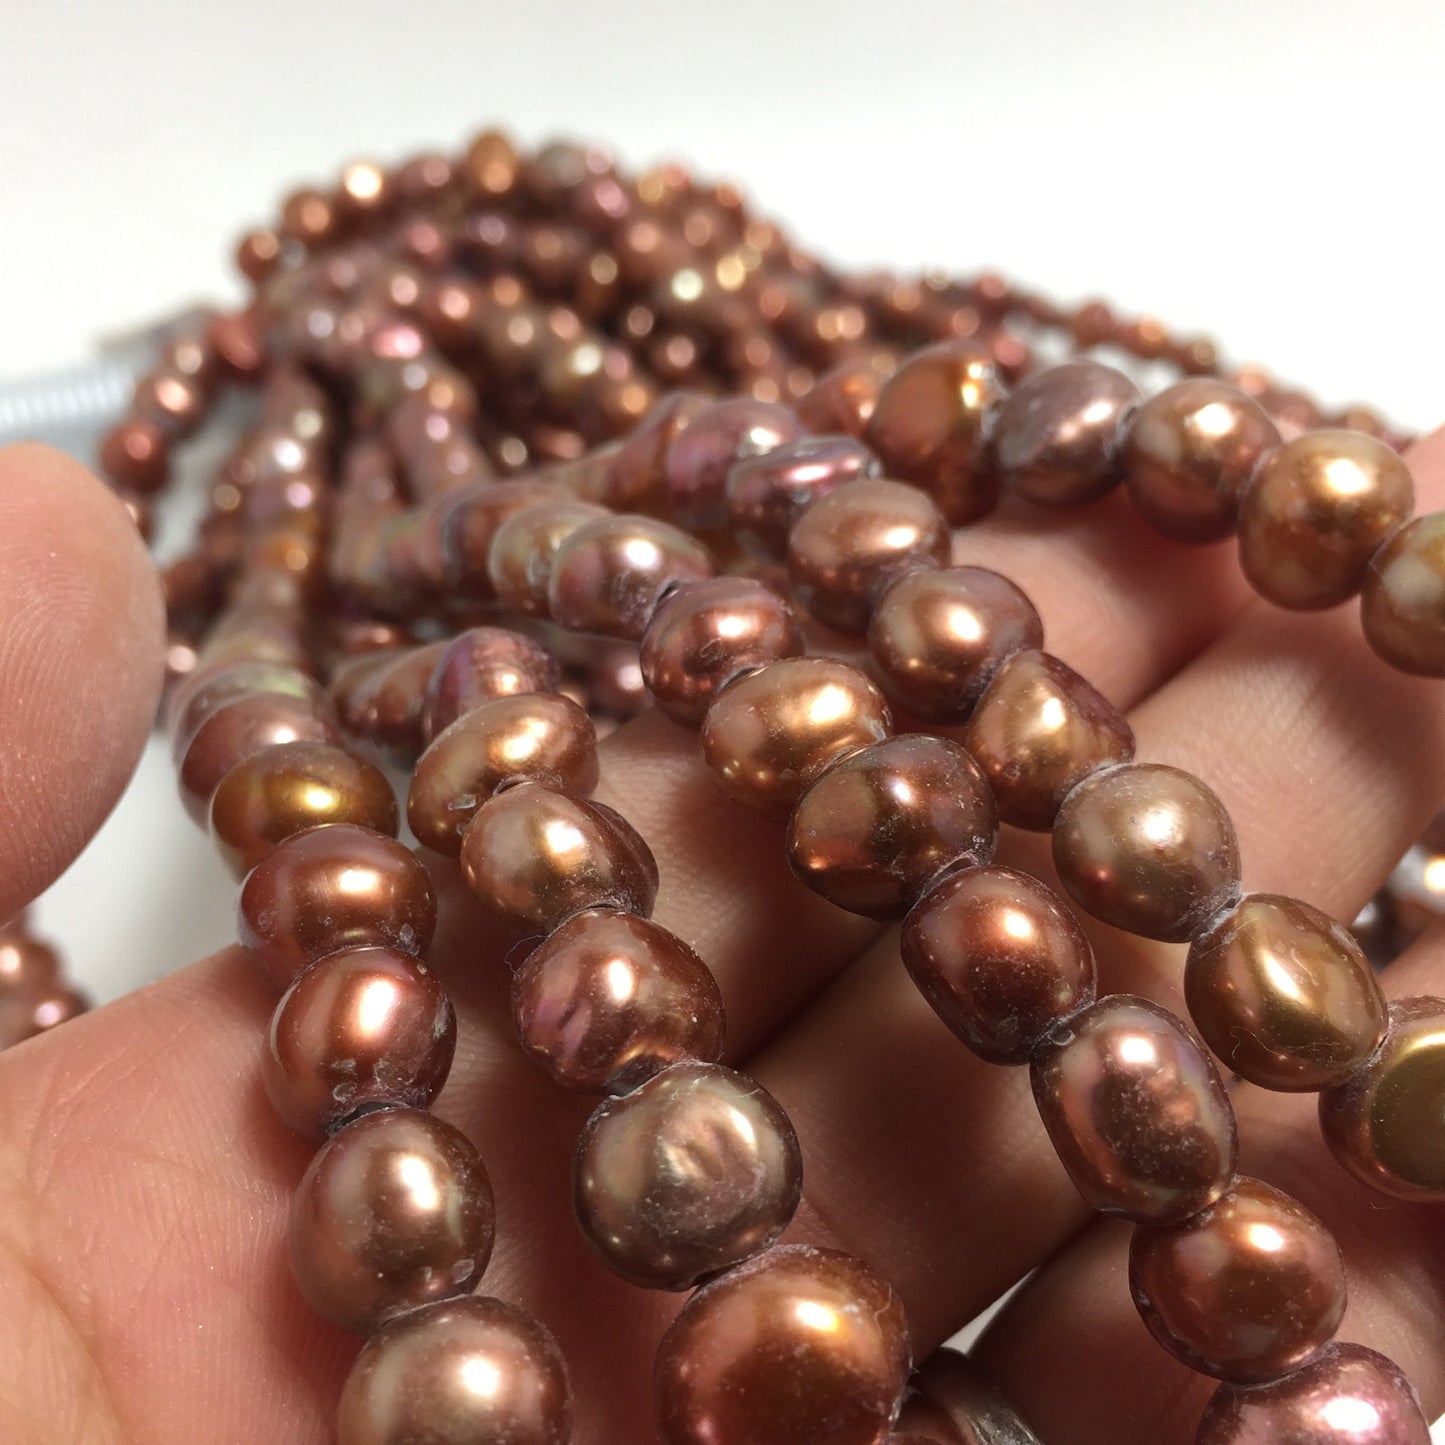 Large Hole Pearls, 7.5-8.5mm Nugget Rice Shape, Copper Color Freshwater Pearls, 8 inch strand with 2.5mm Hole Size, LH074